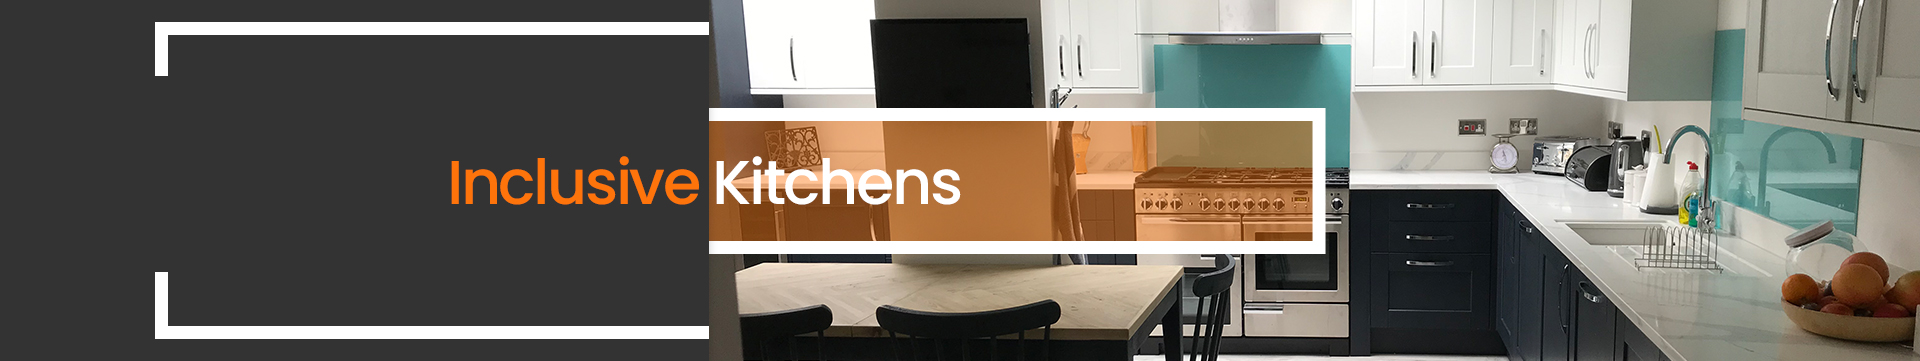 Inclusive & Accessible Kitchens Banner